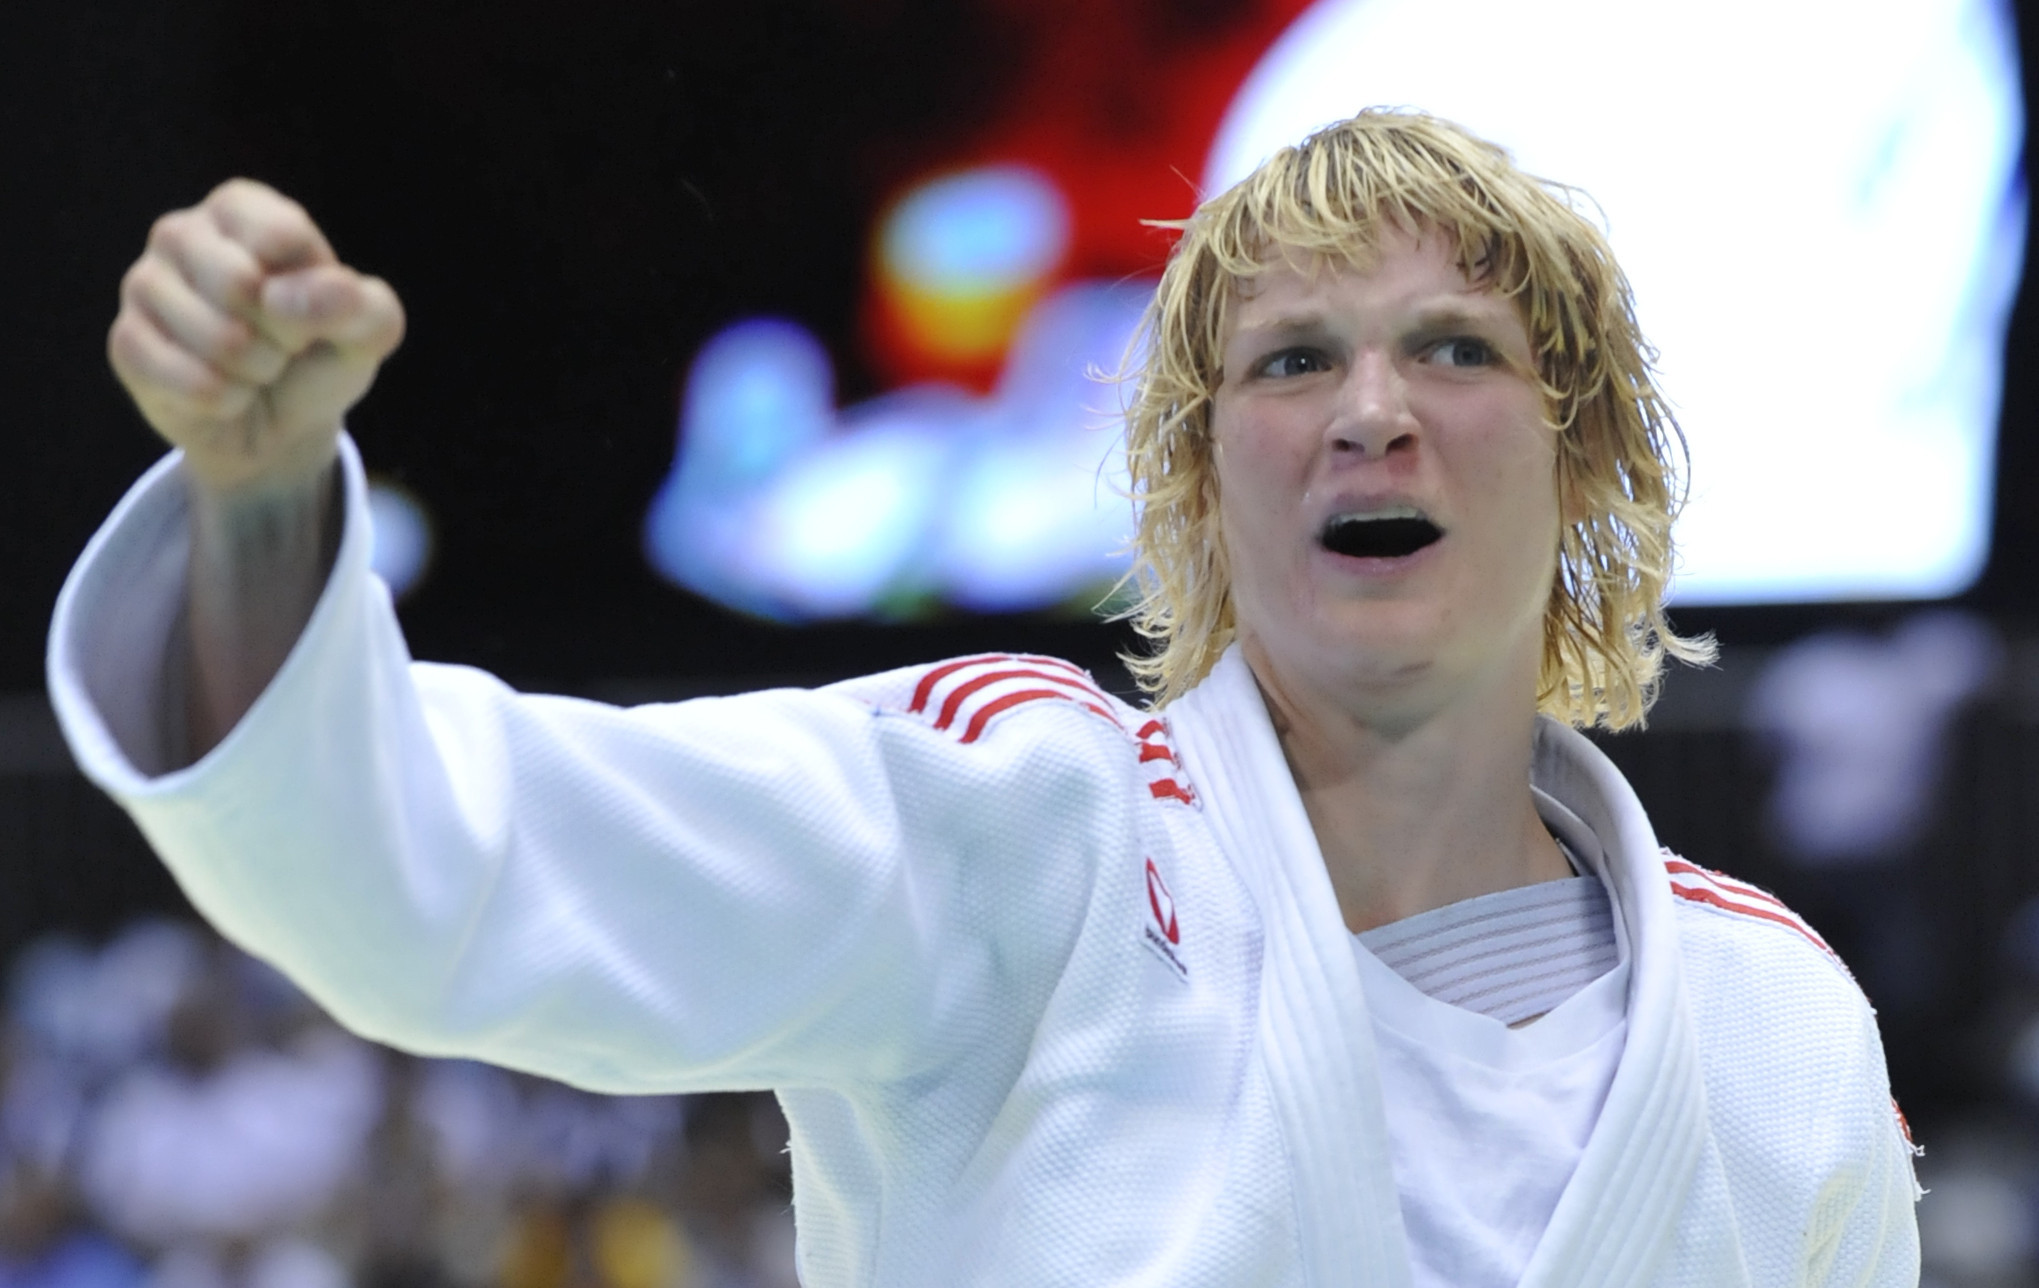 Sabrina Filzmoser is the new chair of the IJF Athletes' Commission ©Getty Images